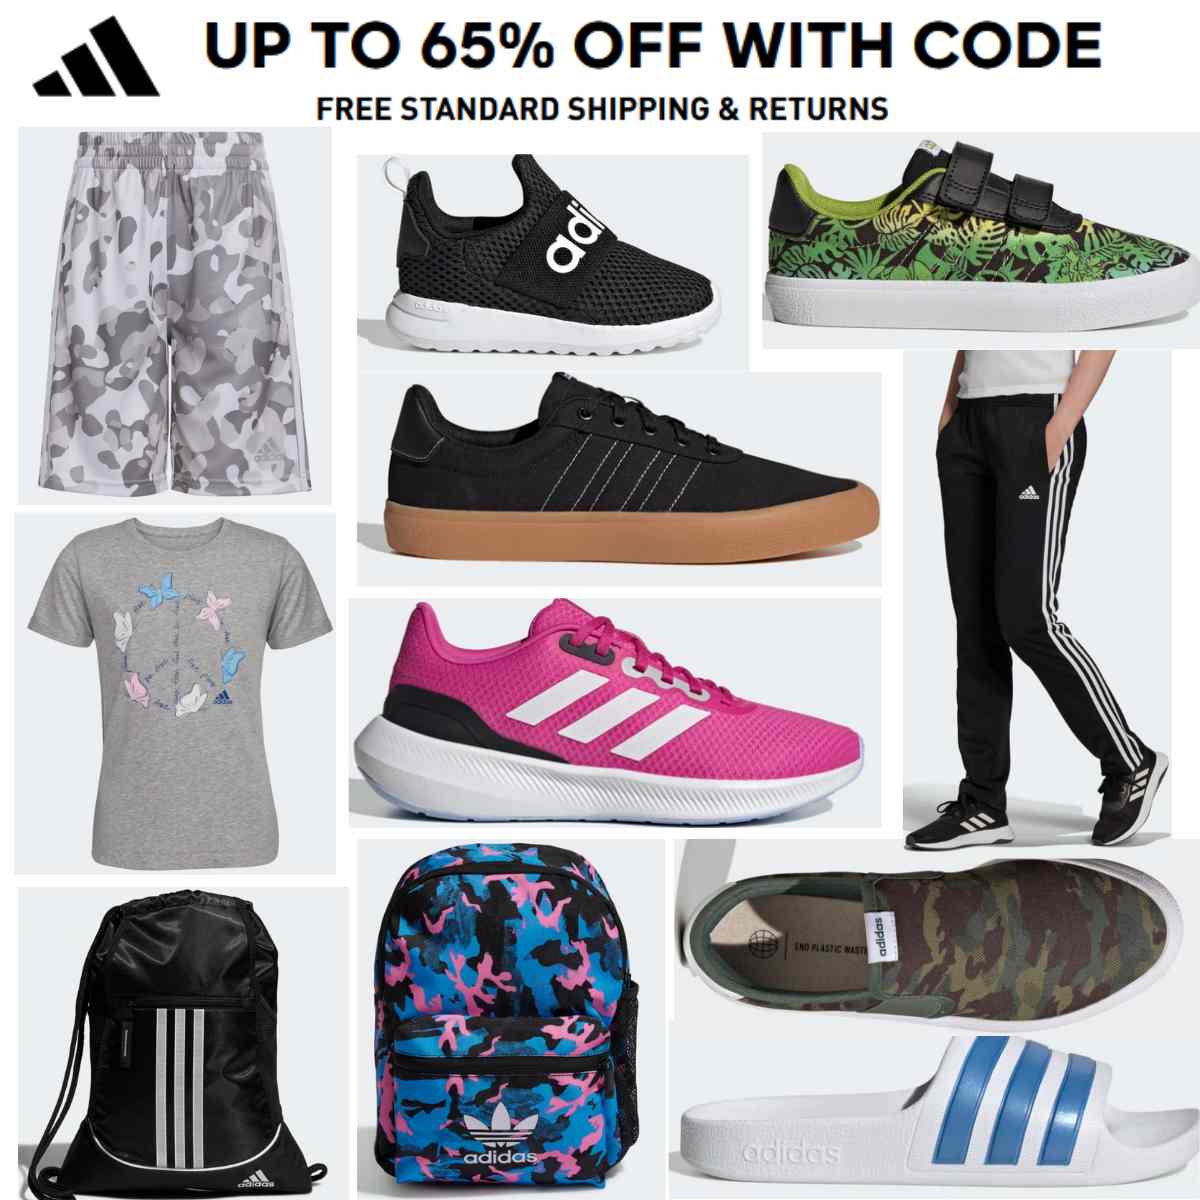 Mid-season sale at Adidas save an extra 30% code plus shipping on all orders | Smart Savers